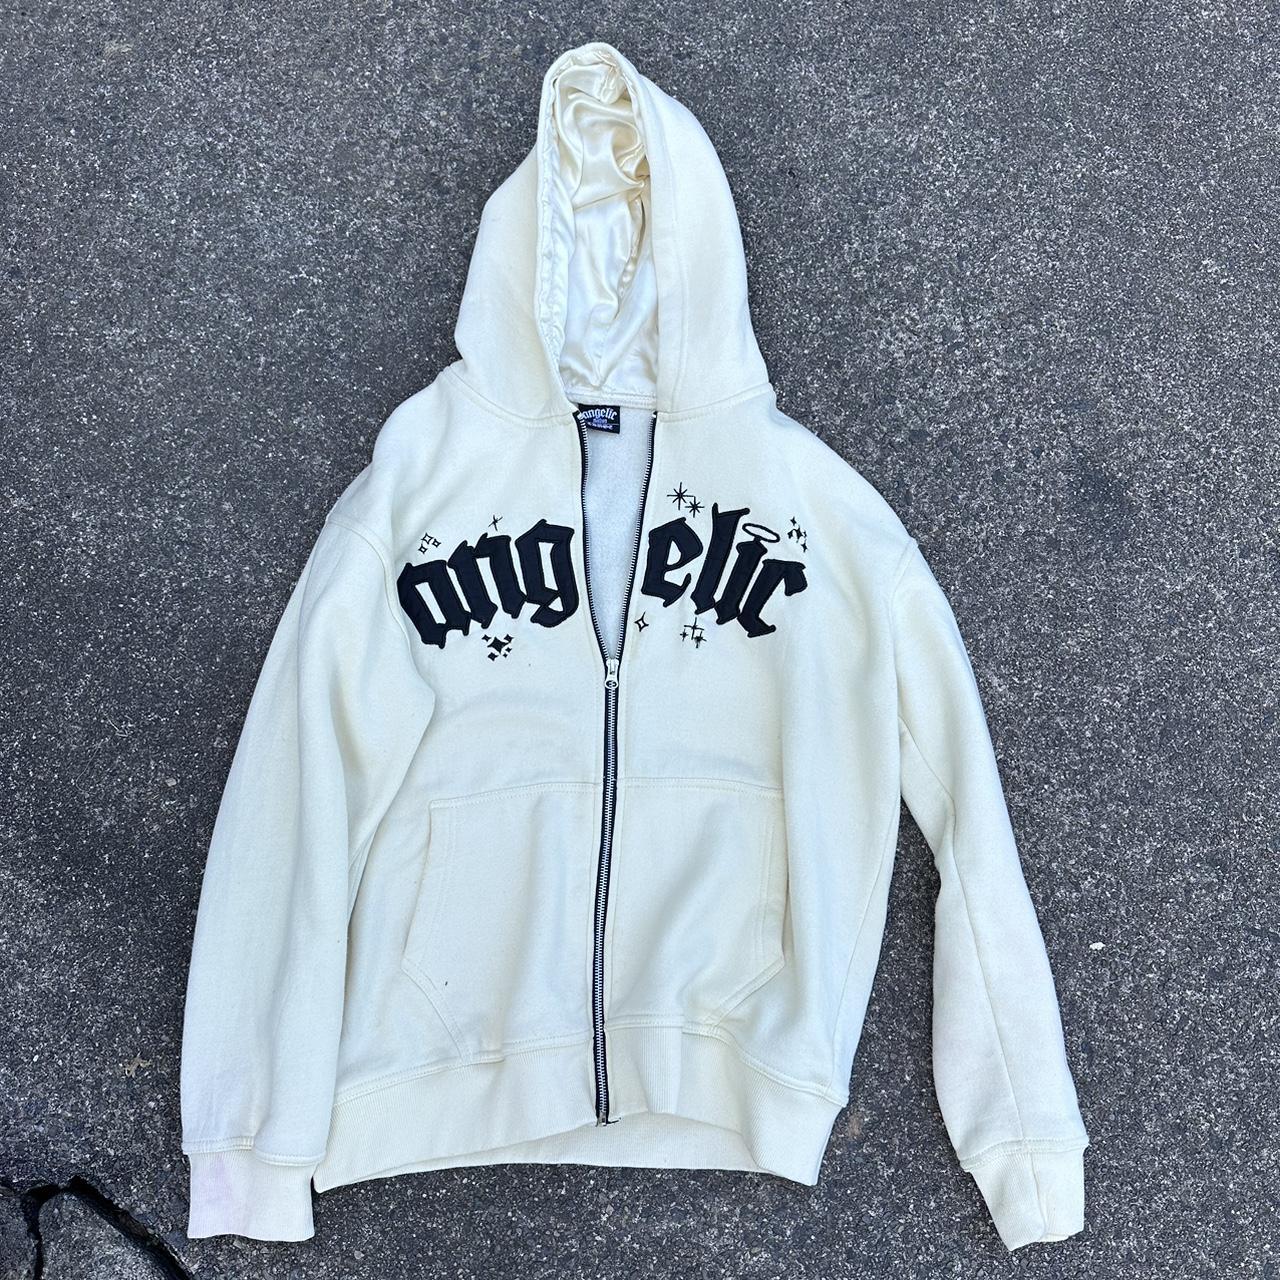 Angelic Motion zip up See discoloring in images - Depop